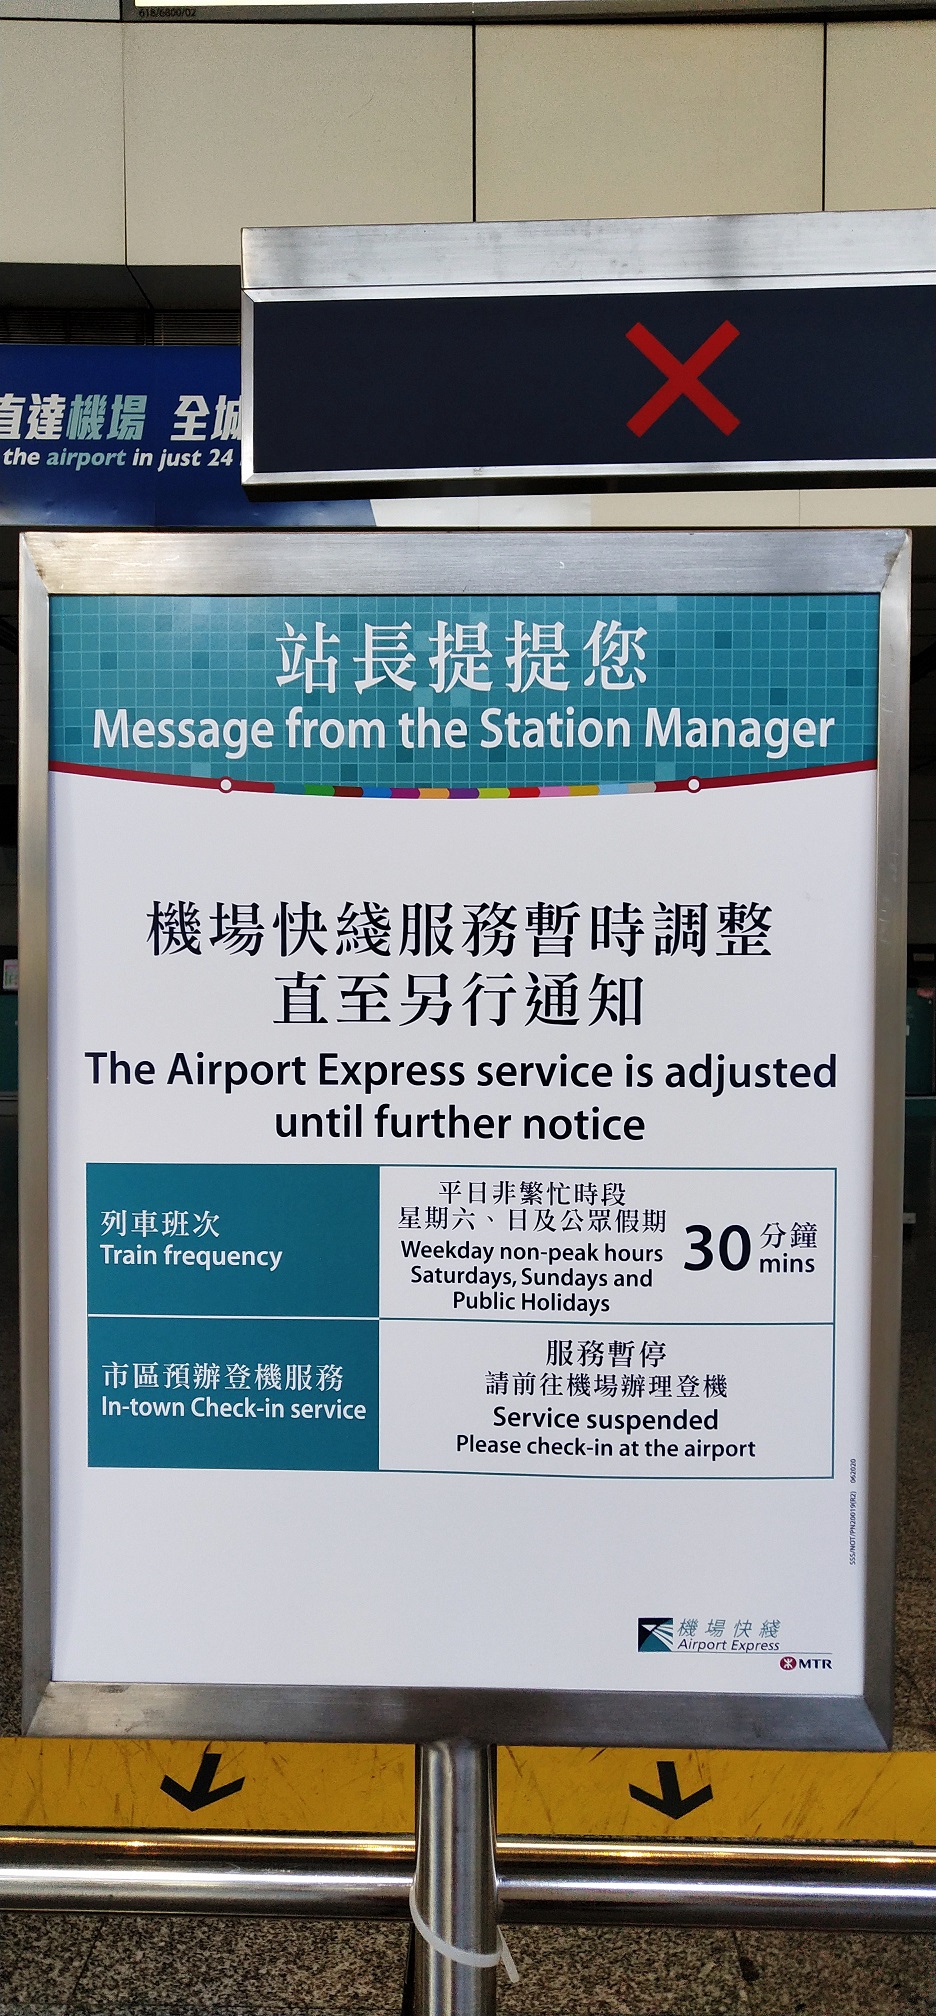 signage shows Airport Express train service adjusts under Covid-19.